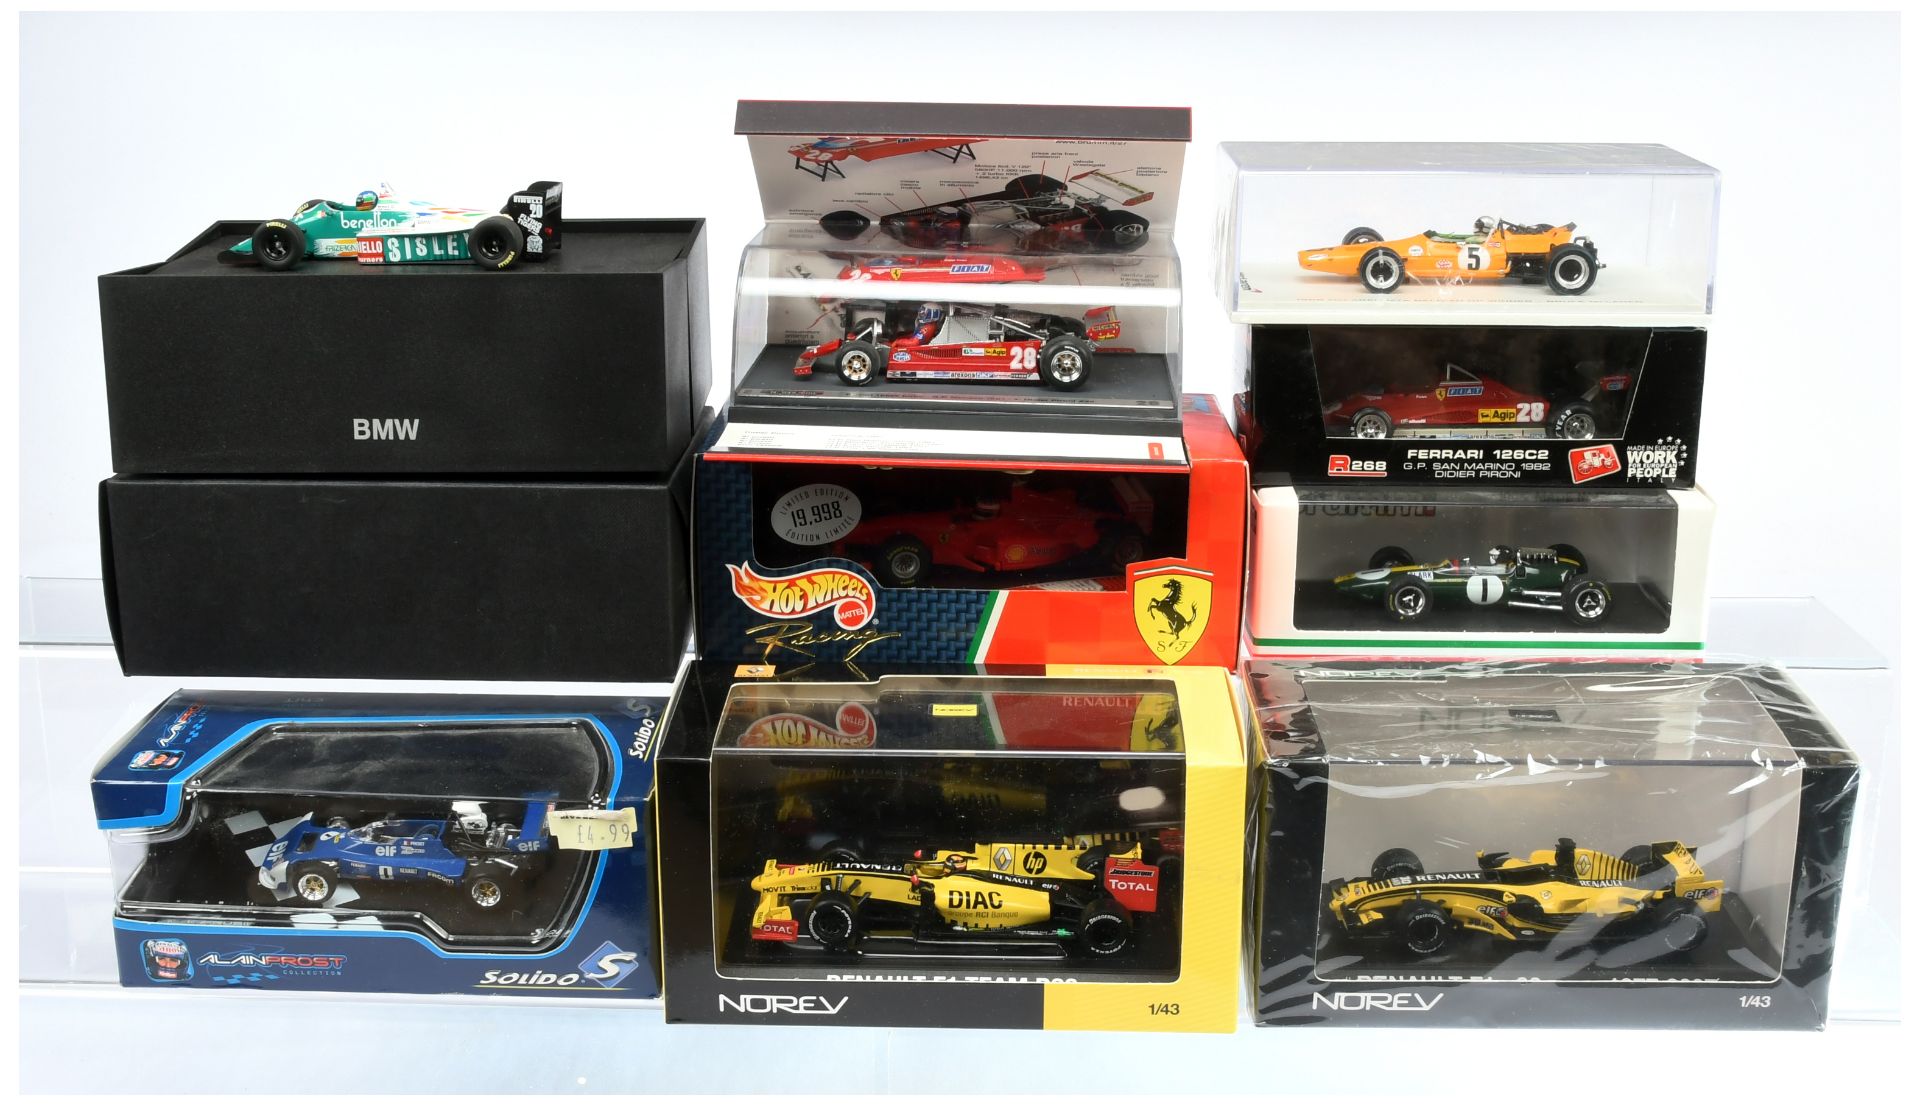 A Group 9 (1/43rd) Racing cars To Include - Norev 518970 Renault R27, Solido Renault Mk20, Hot Wh...